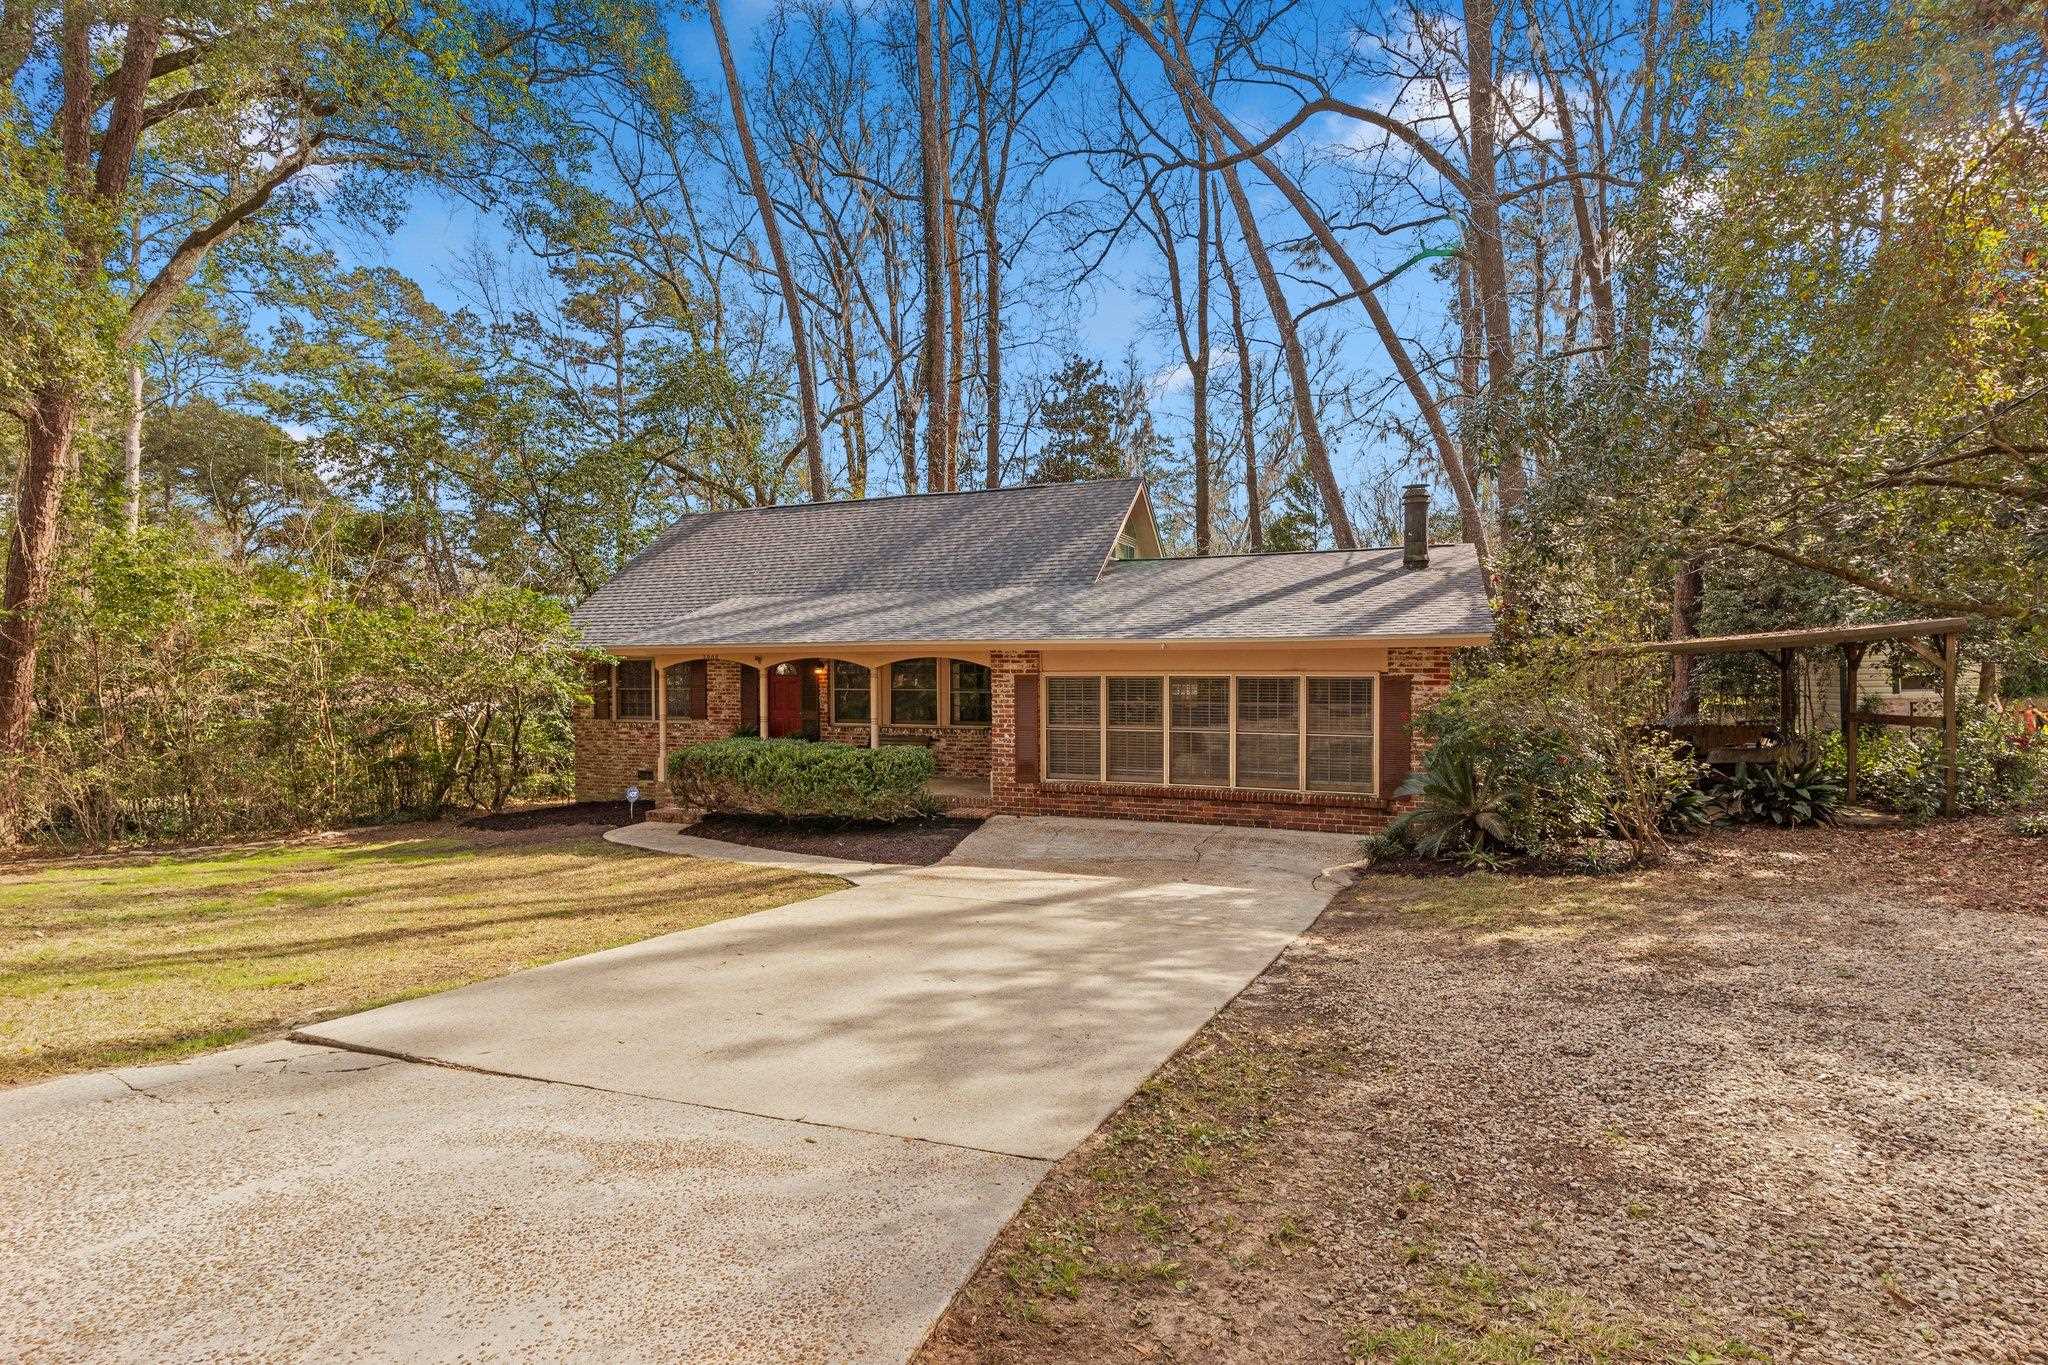 1909 Sherwood Drive,TALLAHASSEE,Florida 32303,4 Bedrooms Bedrooms,2 BathroomsBathrooms,Detached single family,1909 Sherwood Drive,370301